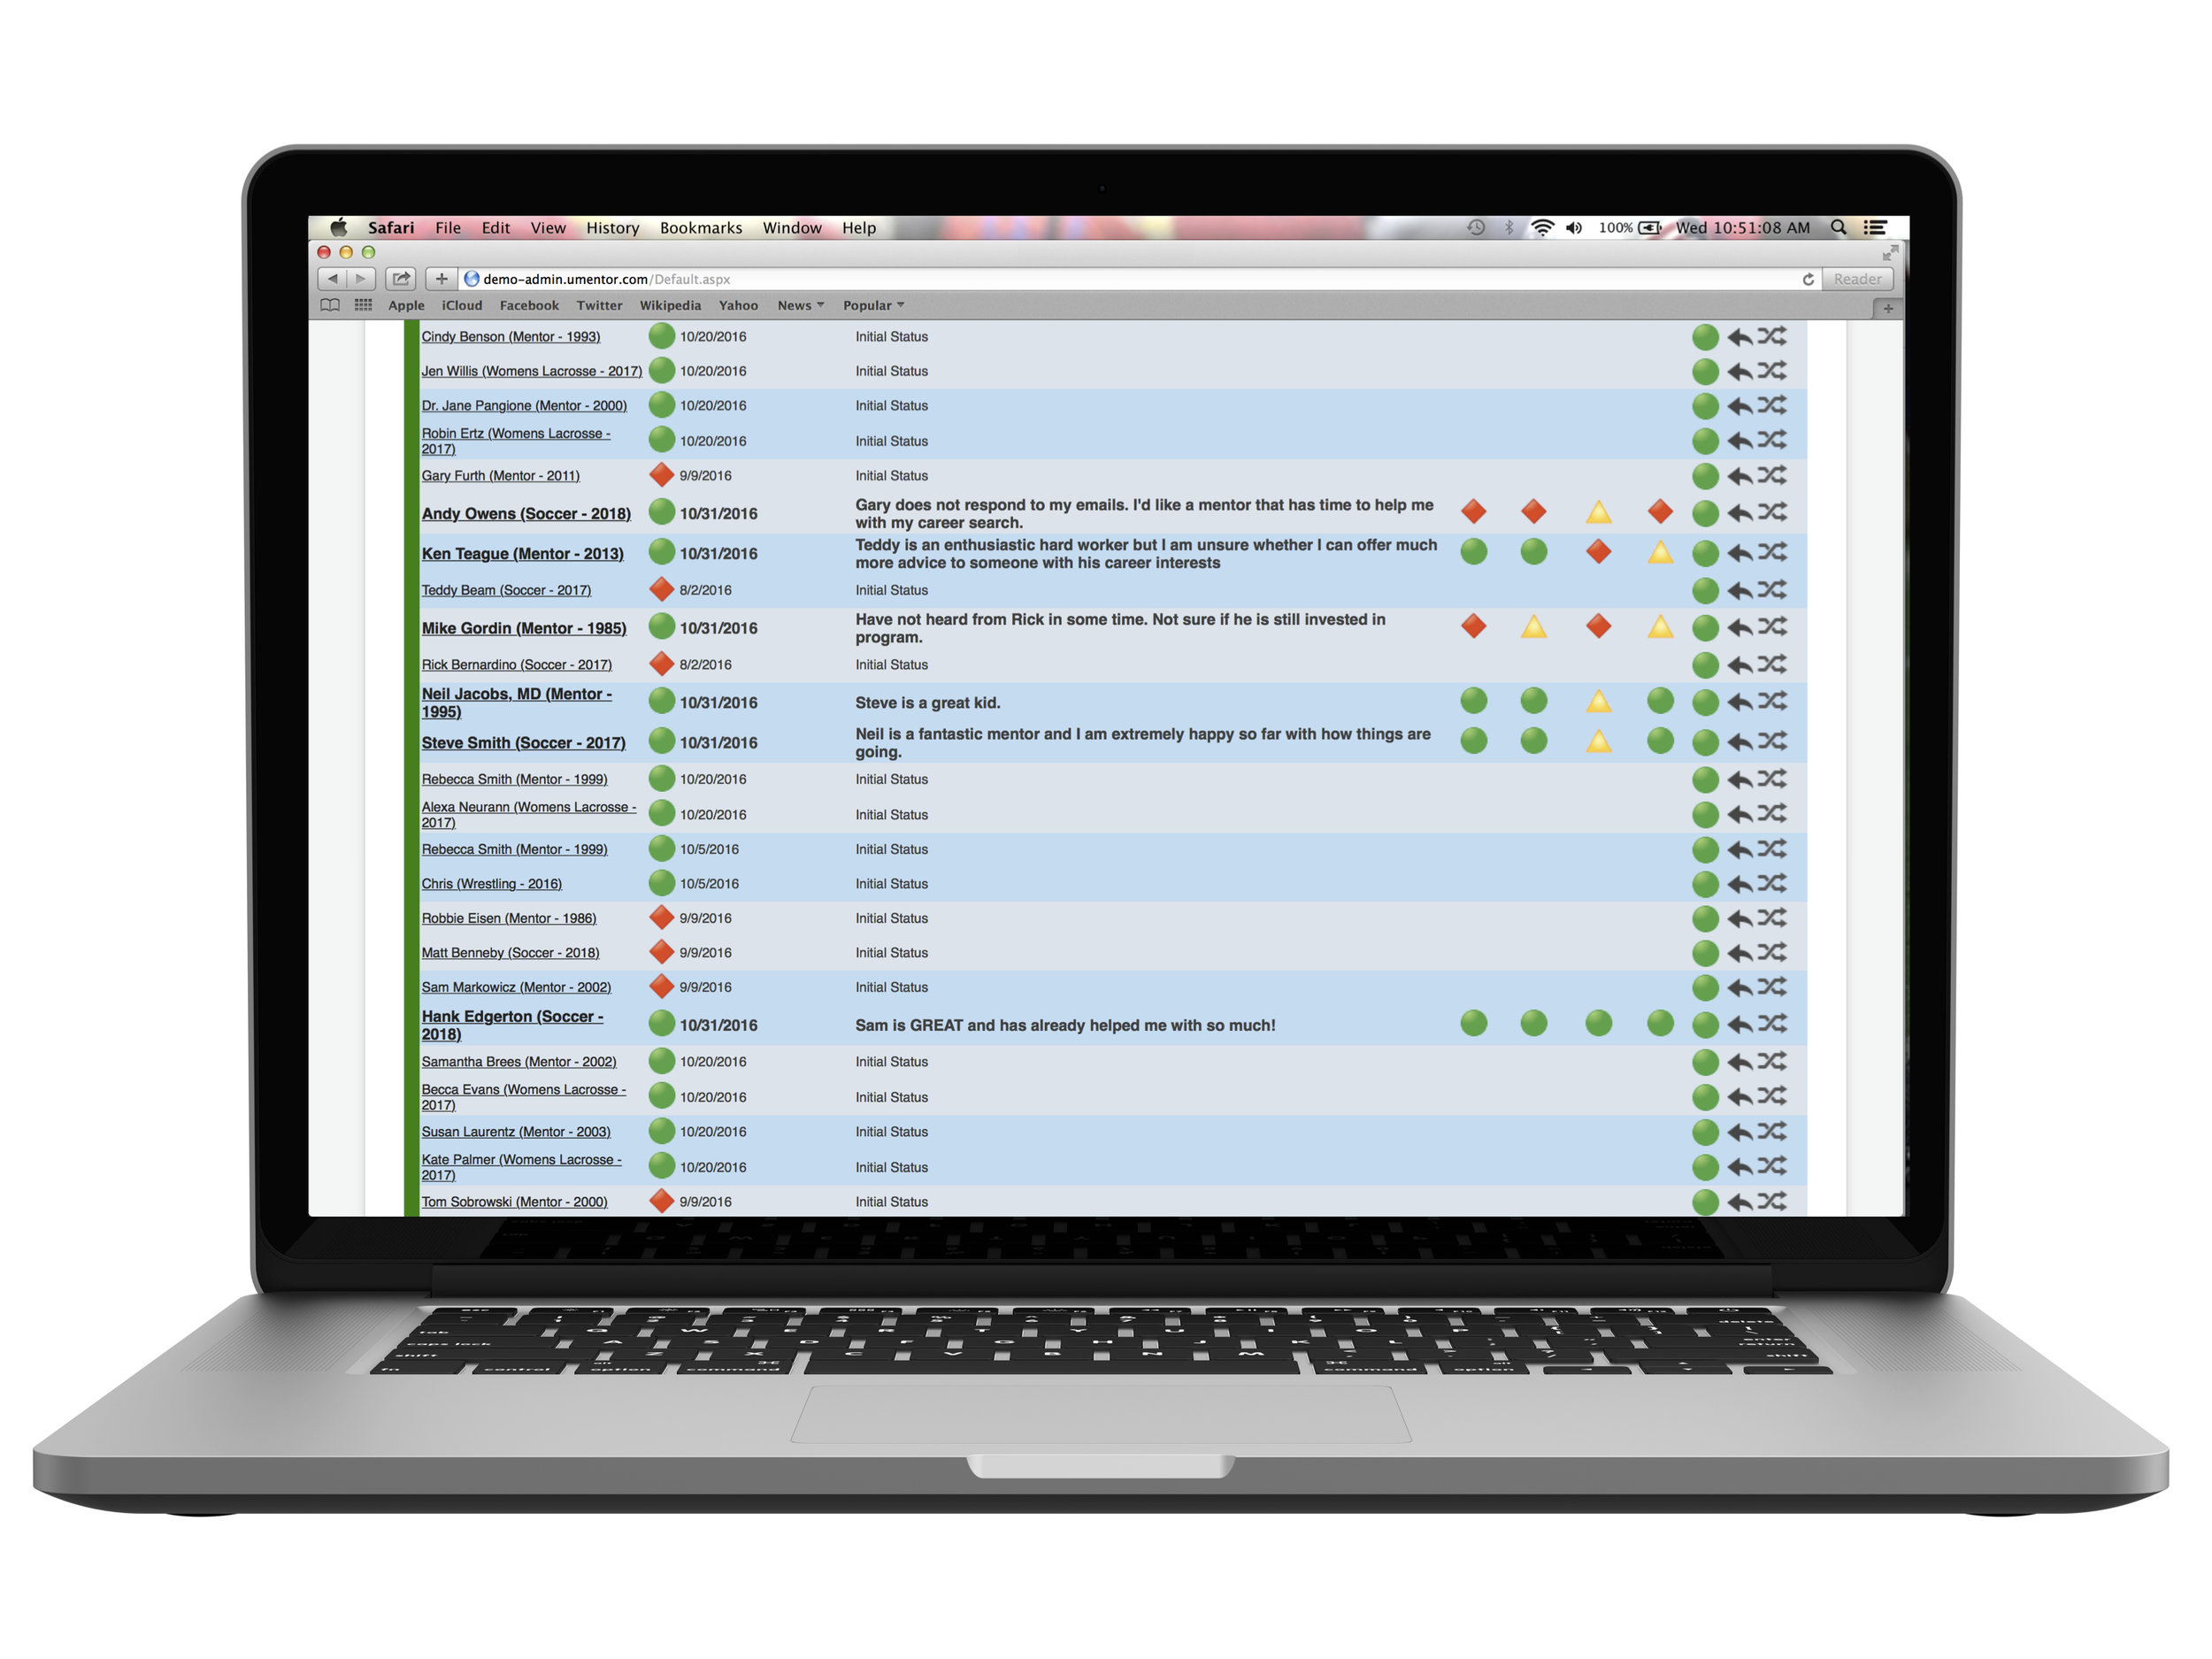  Umentor's admin panel allows for easy management of a large number of users at once. 